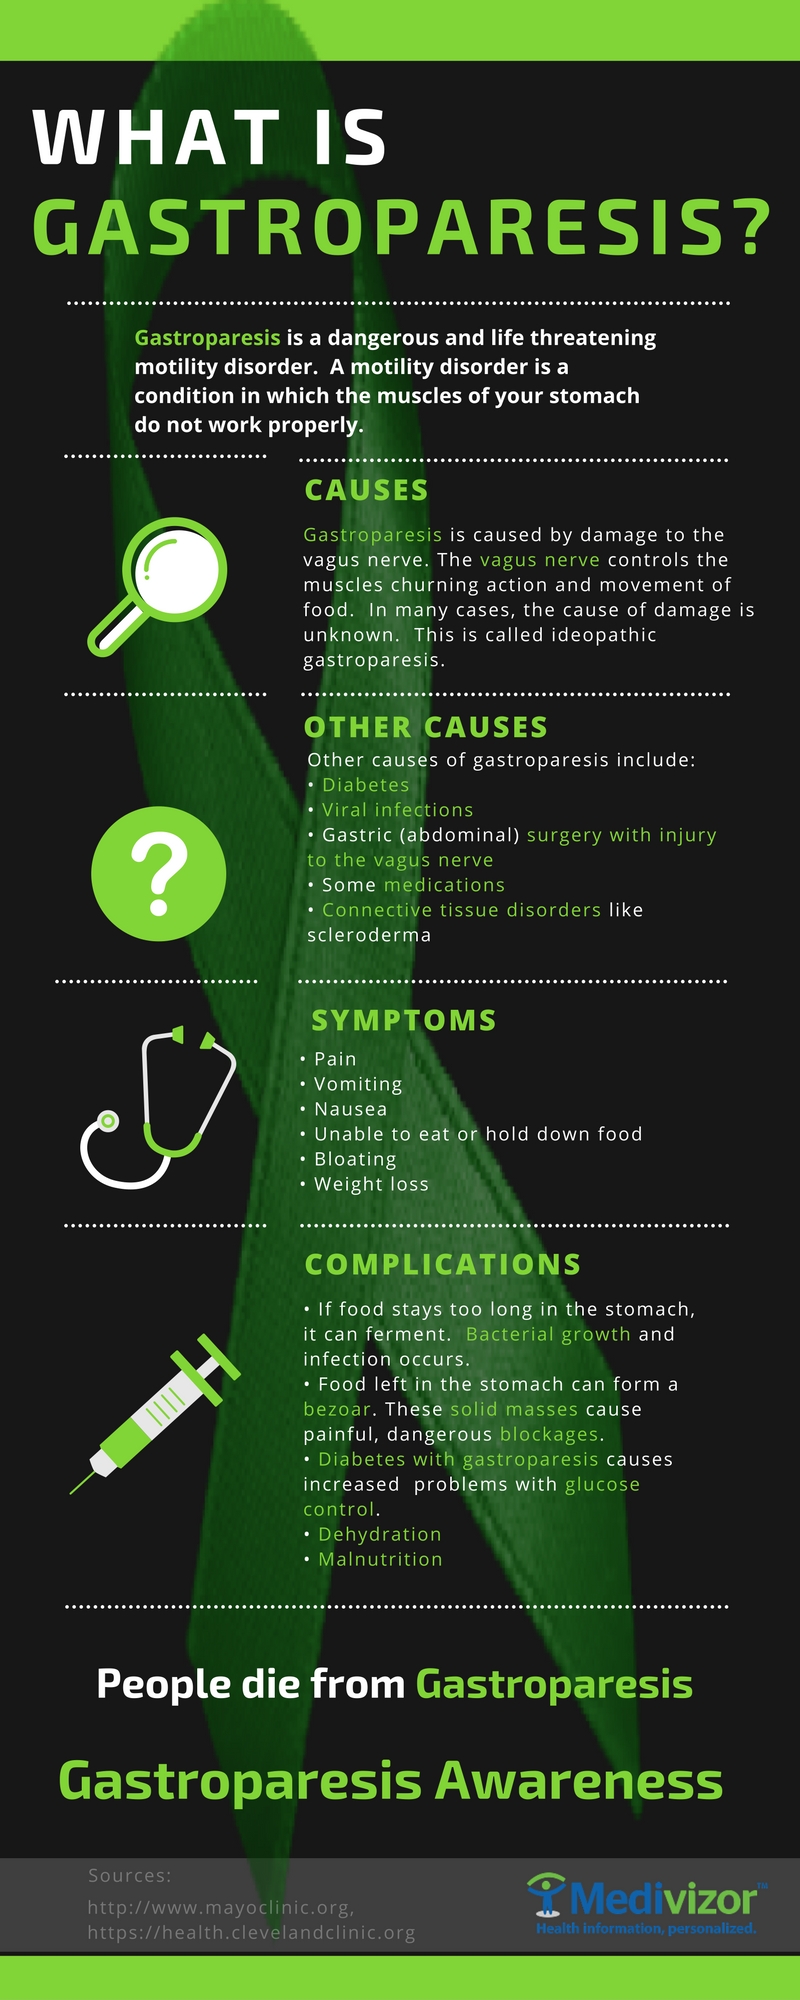 Gastroparesis Awareness: What is it? What causes it? Is there a cure?